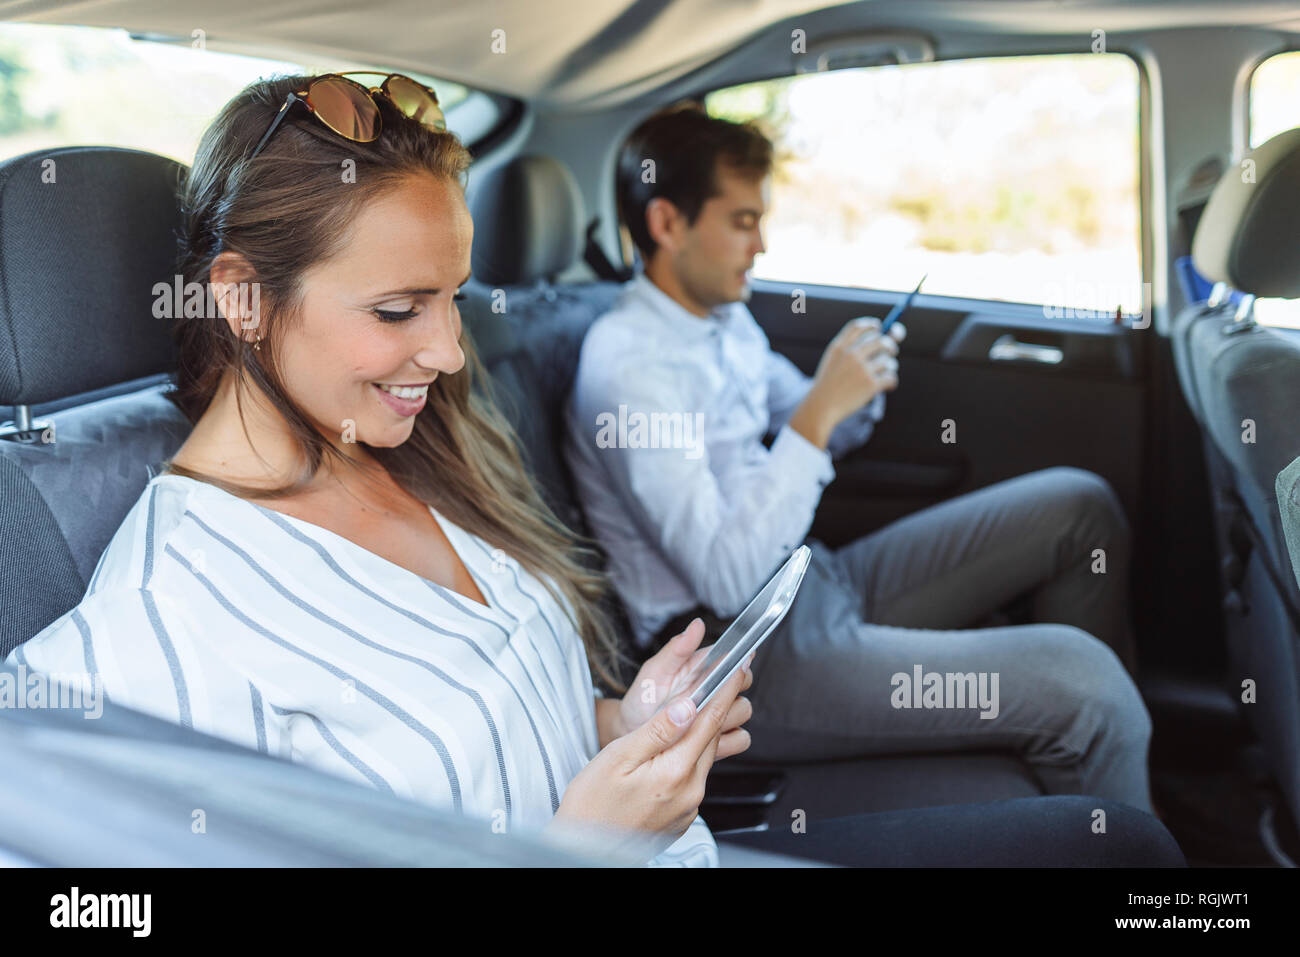 woman-man-using-tablet-cell-phone-back-seat-car-hi-res-stock